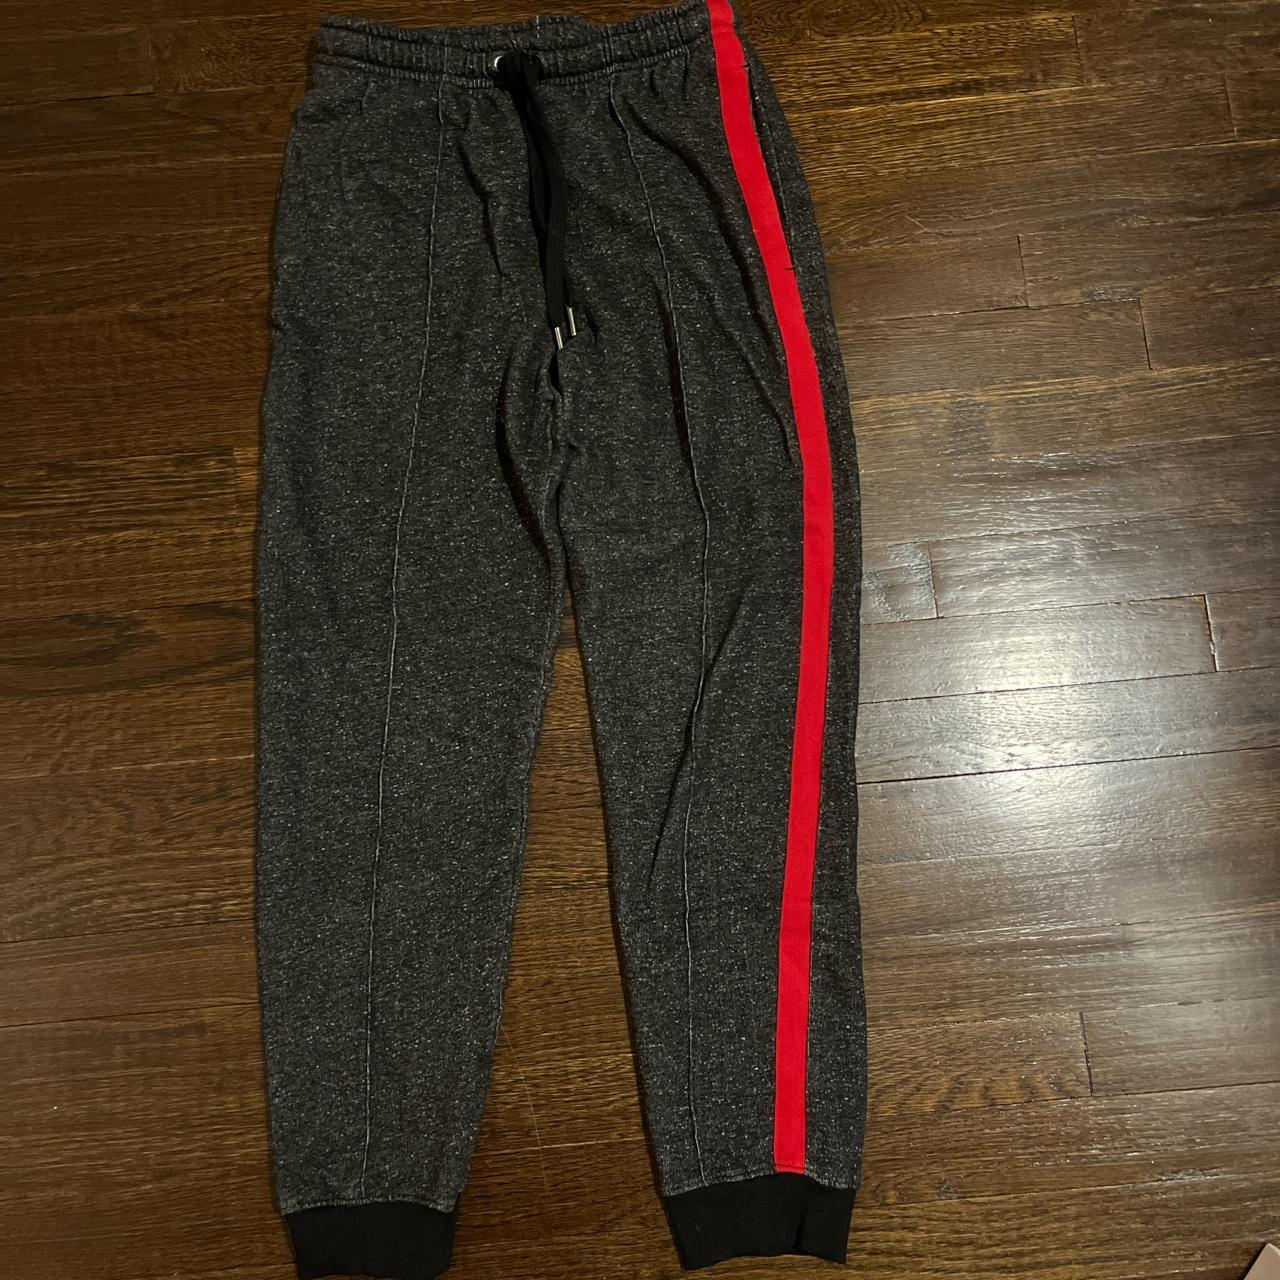 Product Image 1 - Grey sweatpants with a red